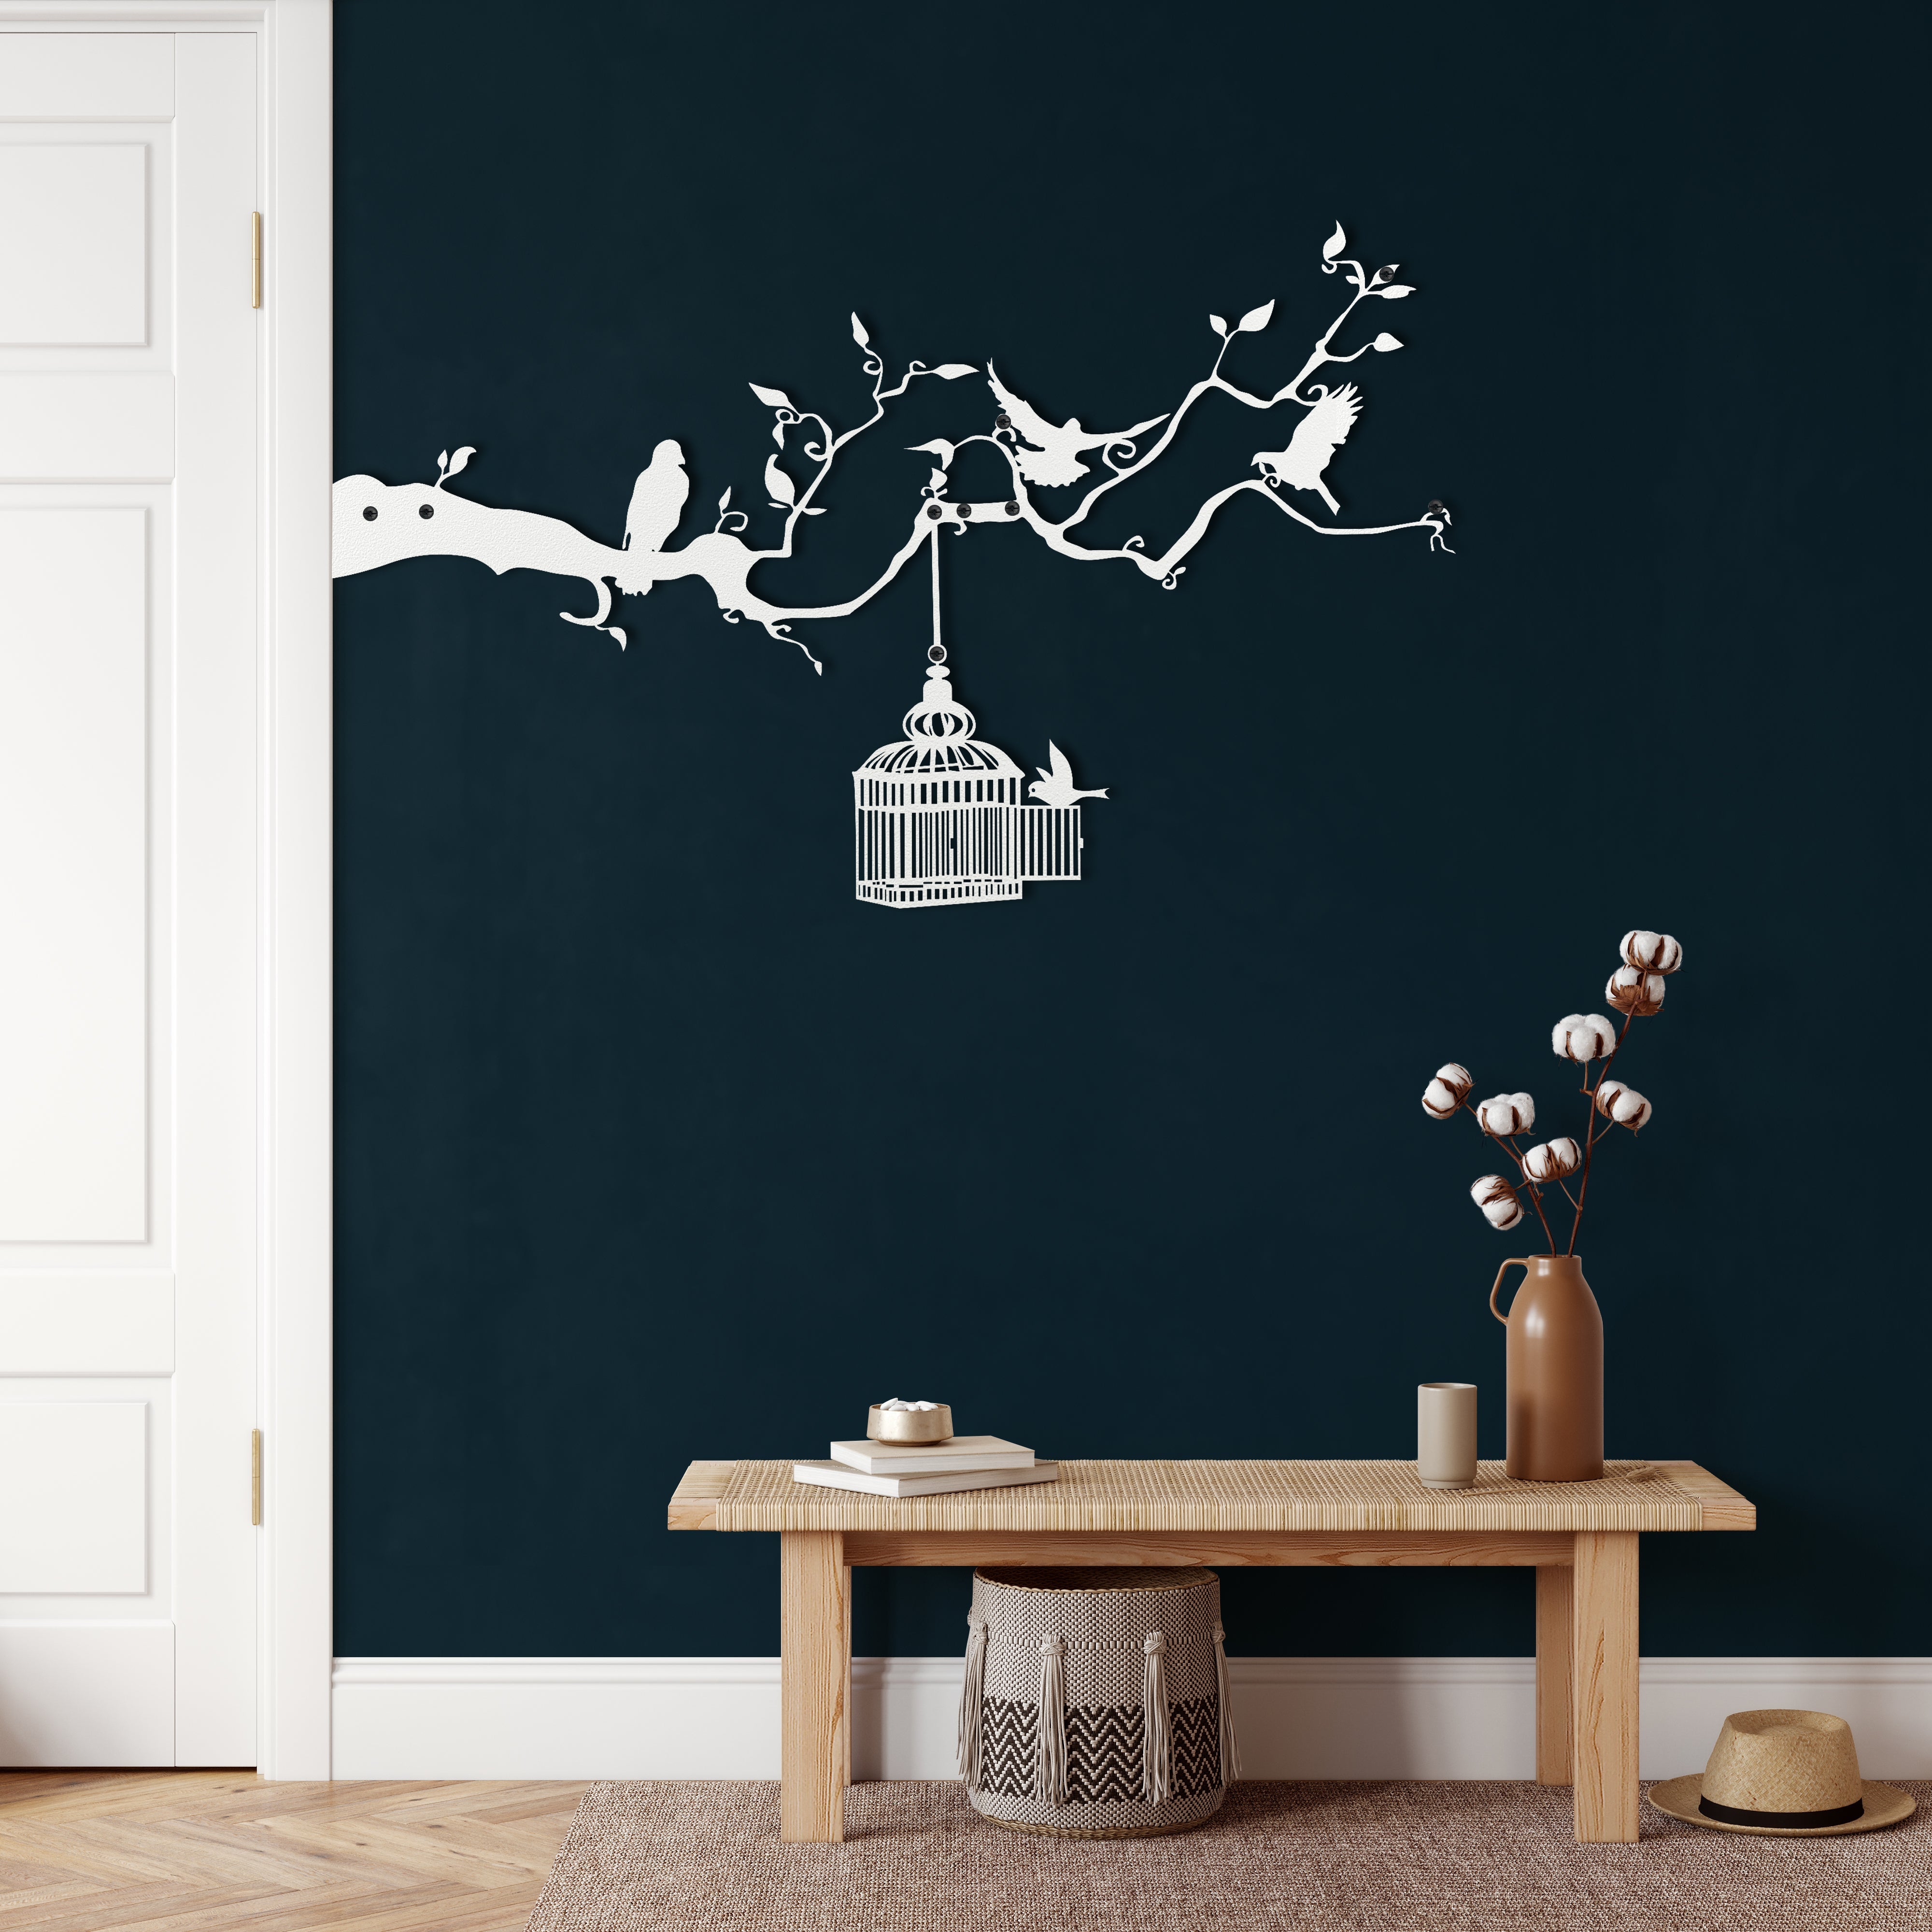 Branch and Trellis Wall Decor